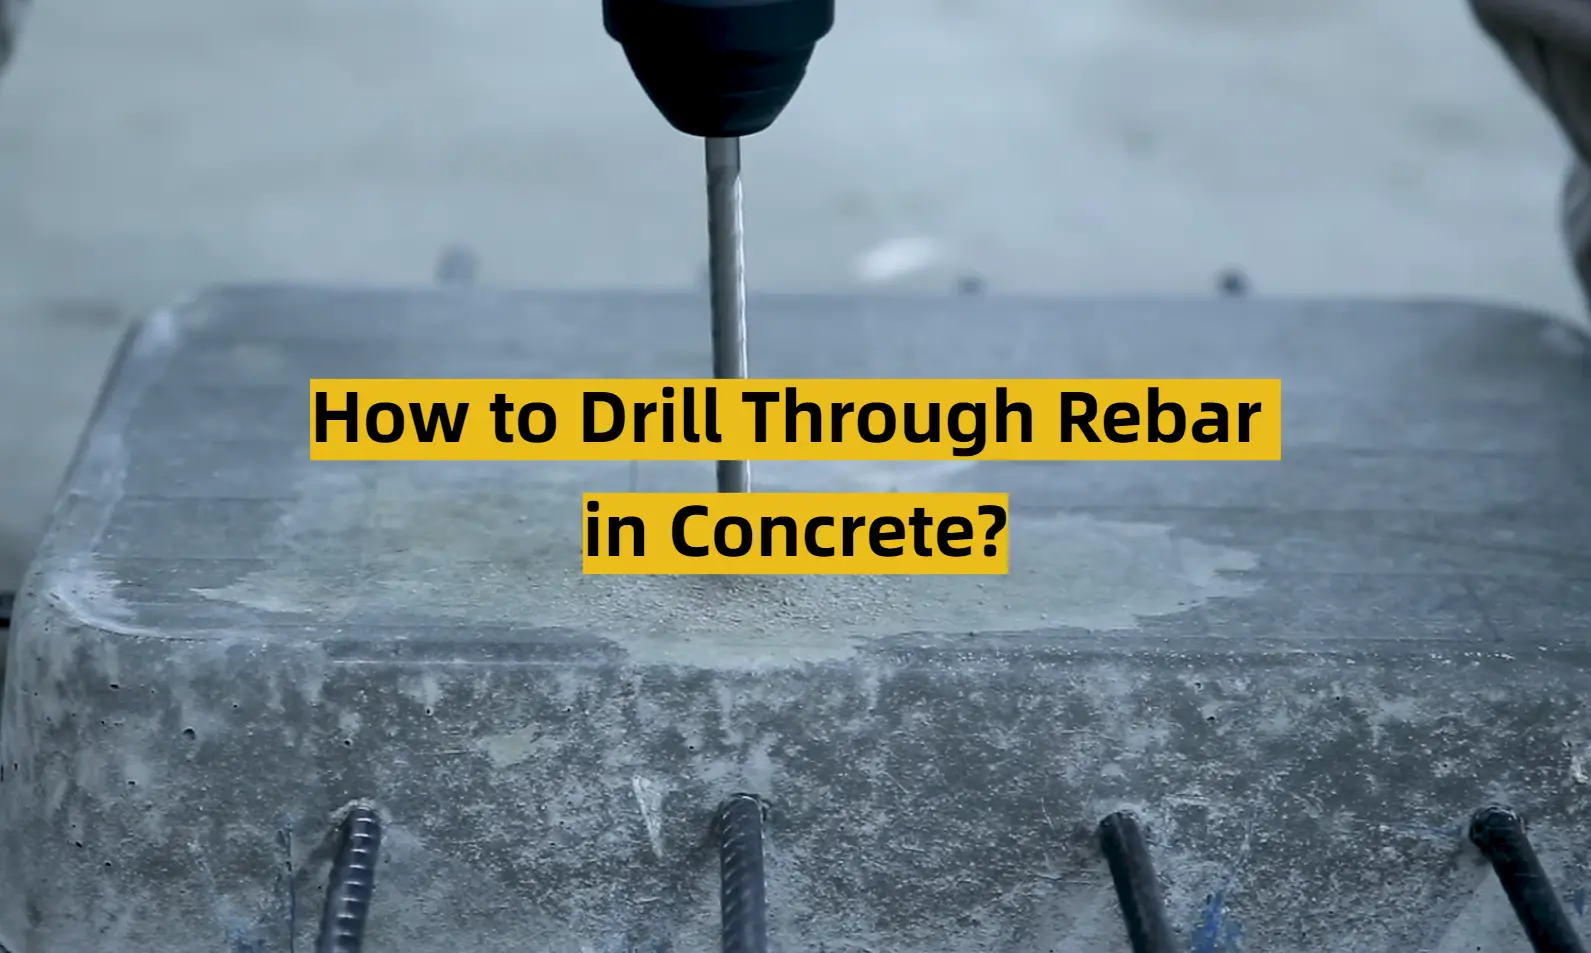 How to Drill Through Rebar in Concrete?